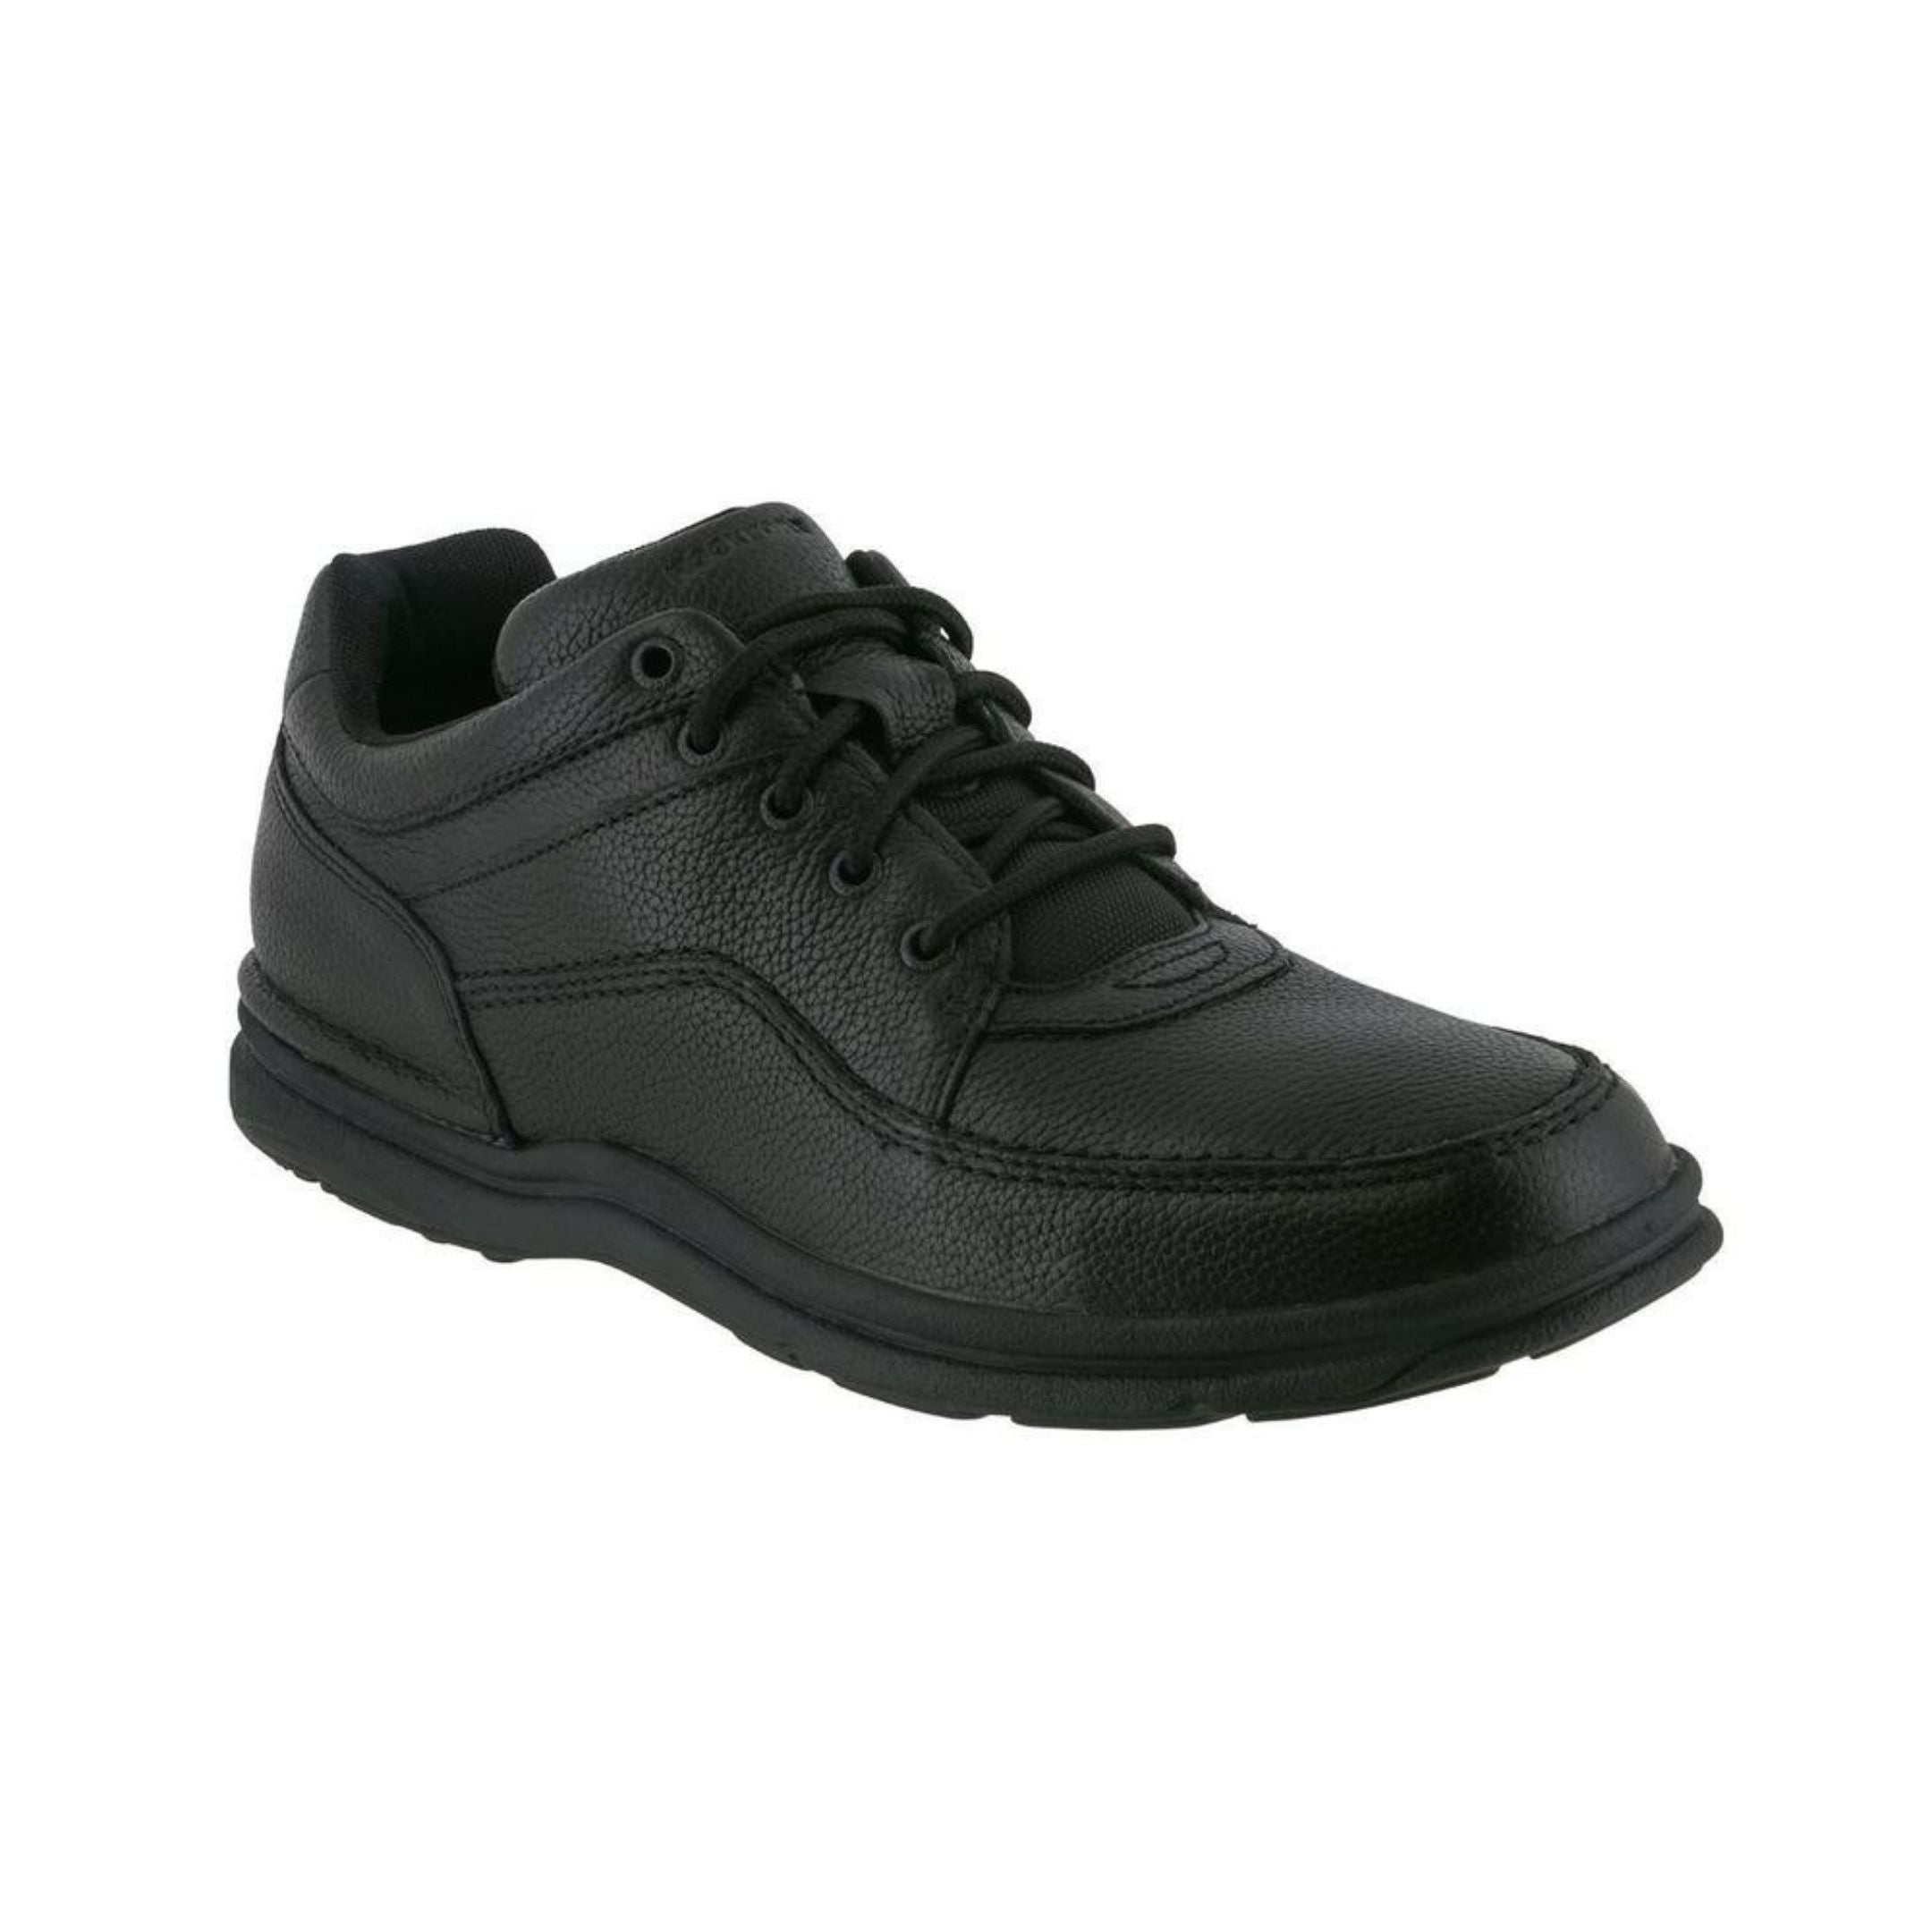 Black leather lace up shoe with black outsole.